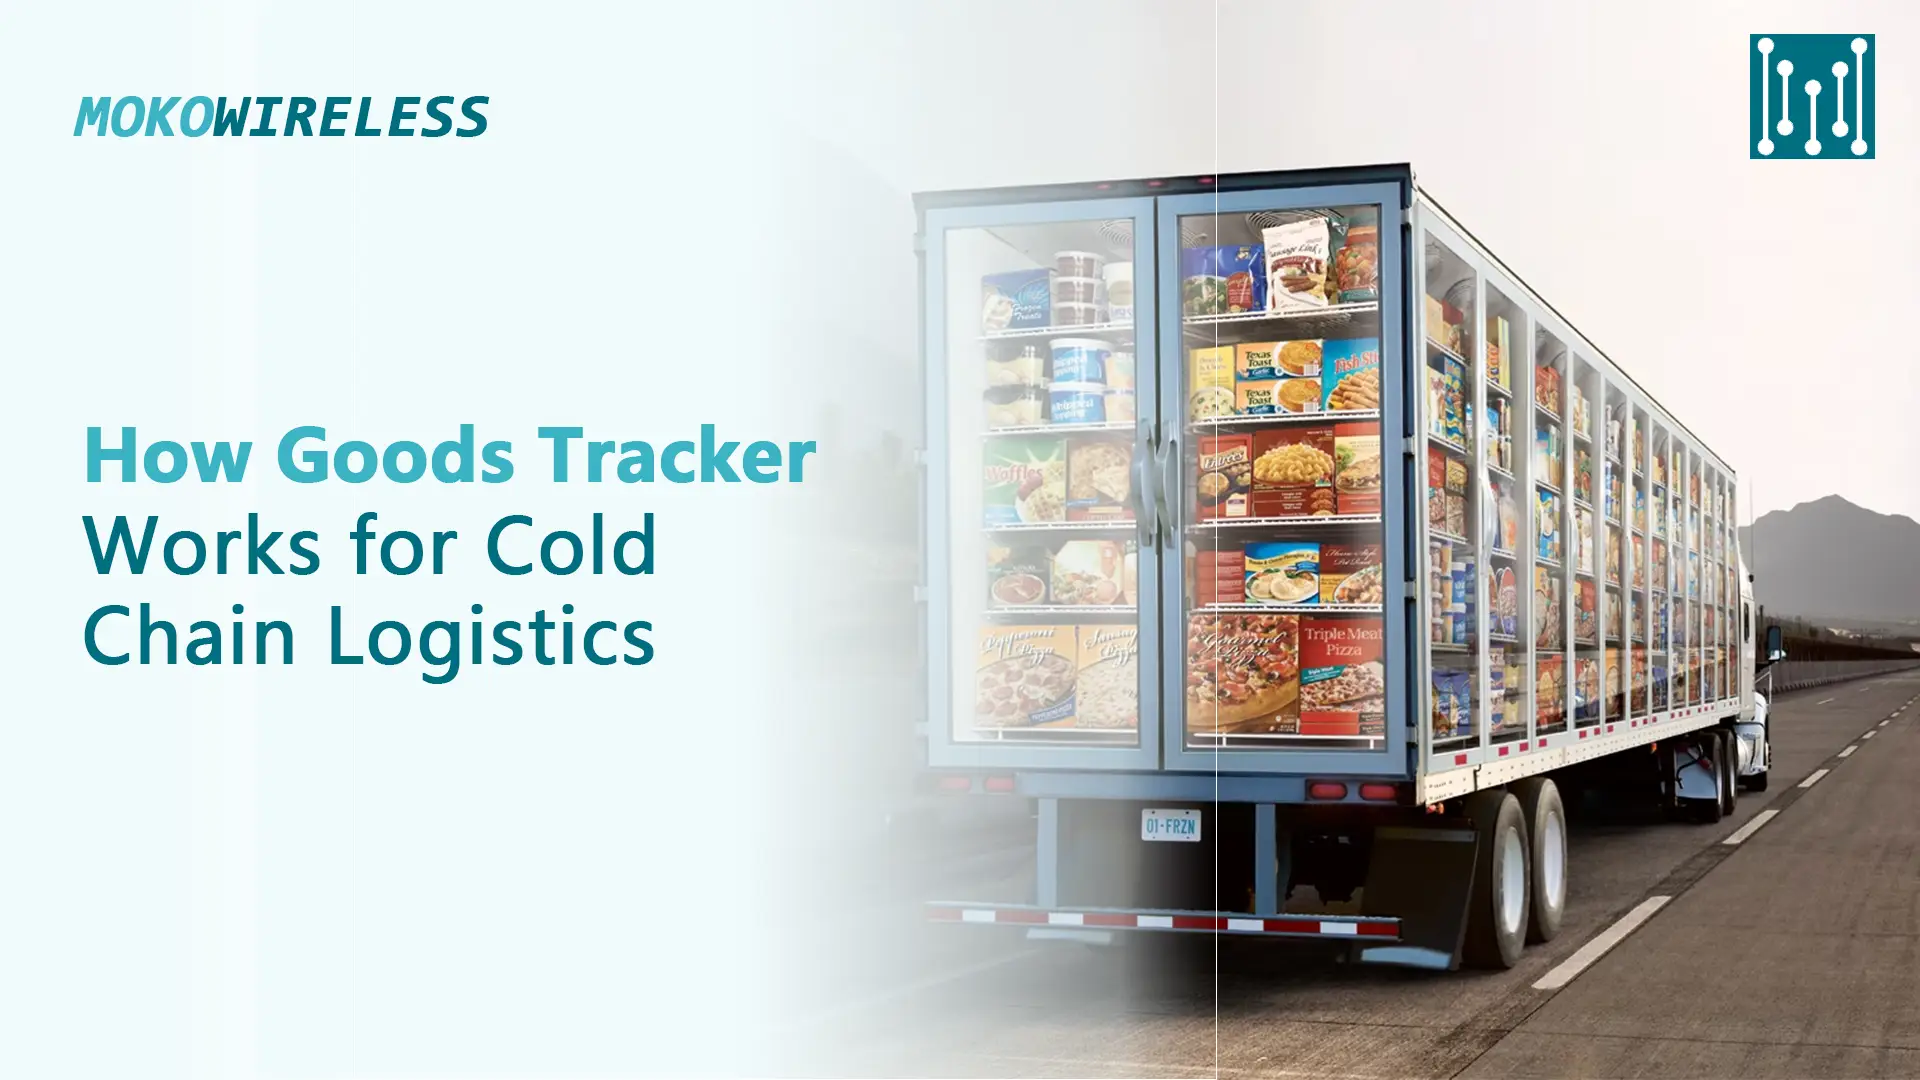 How Goods Tracker Works for Cold Chain Logistics